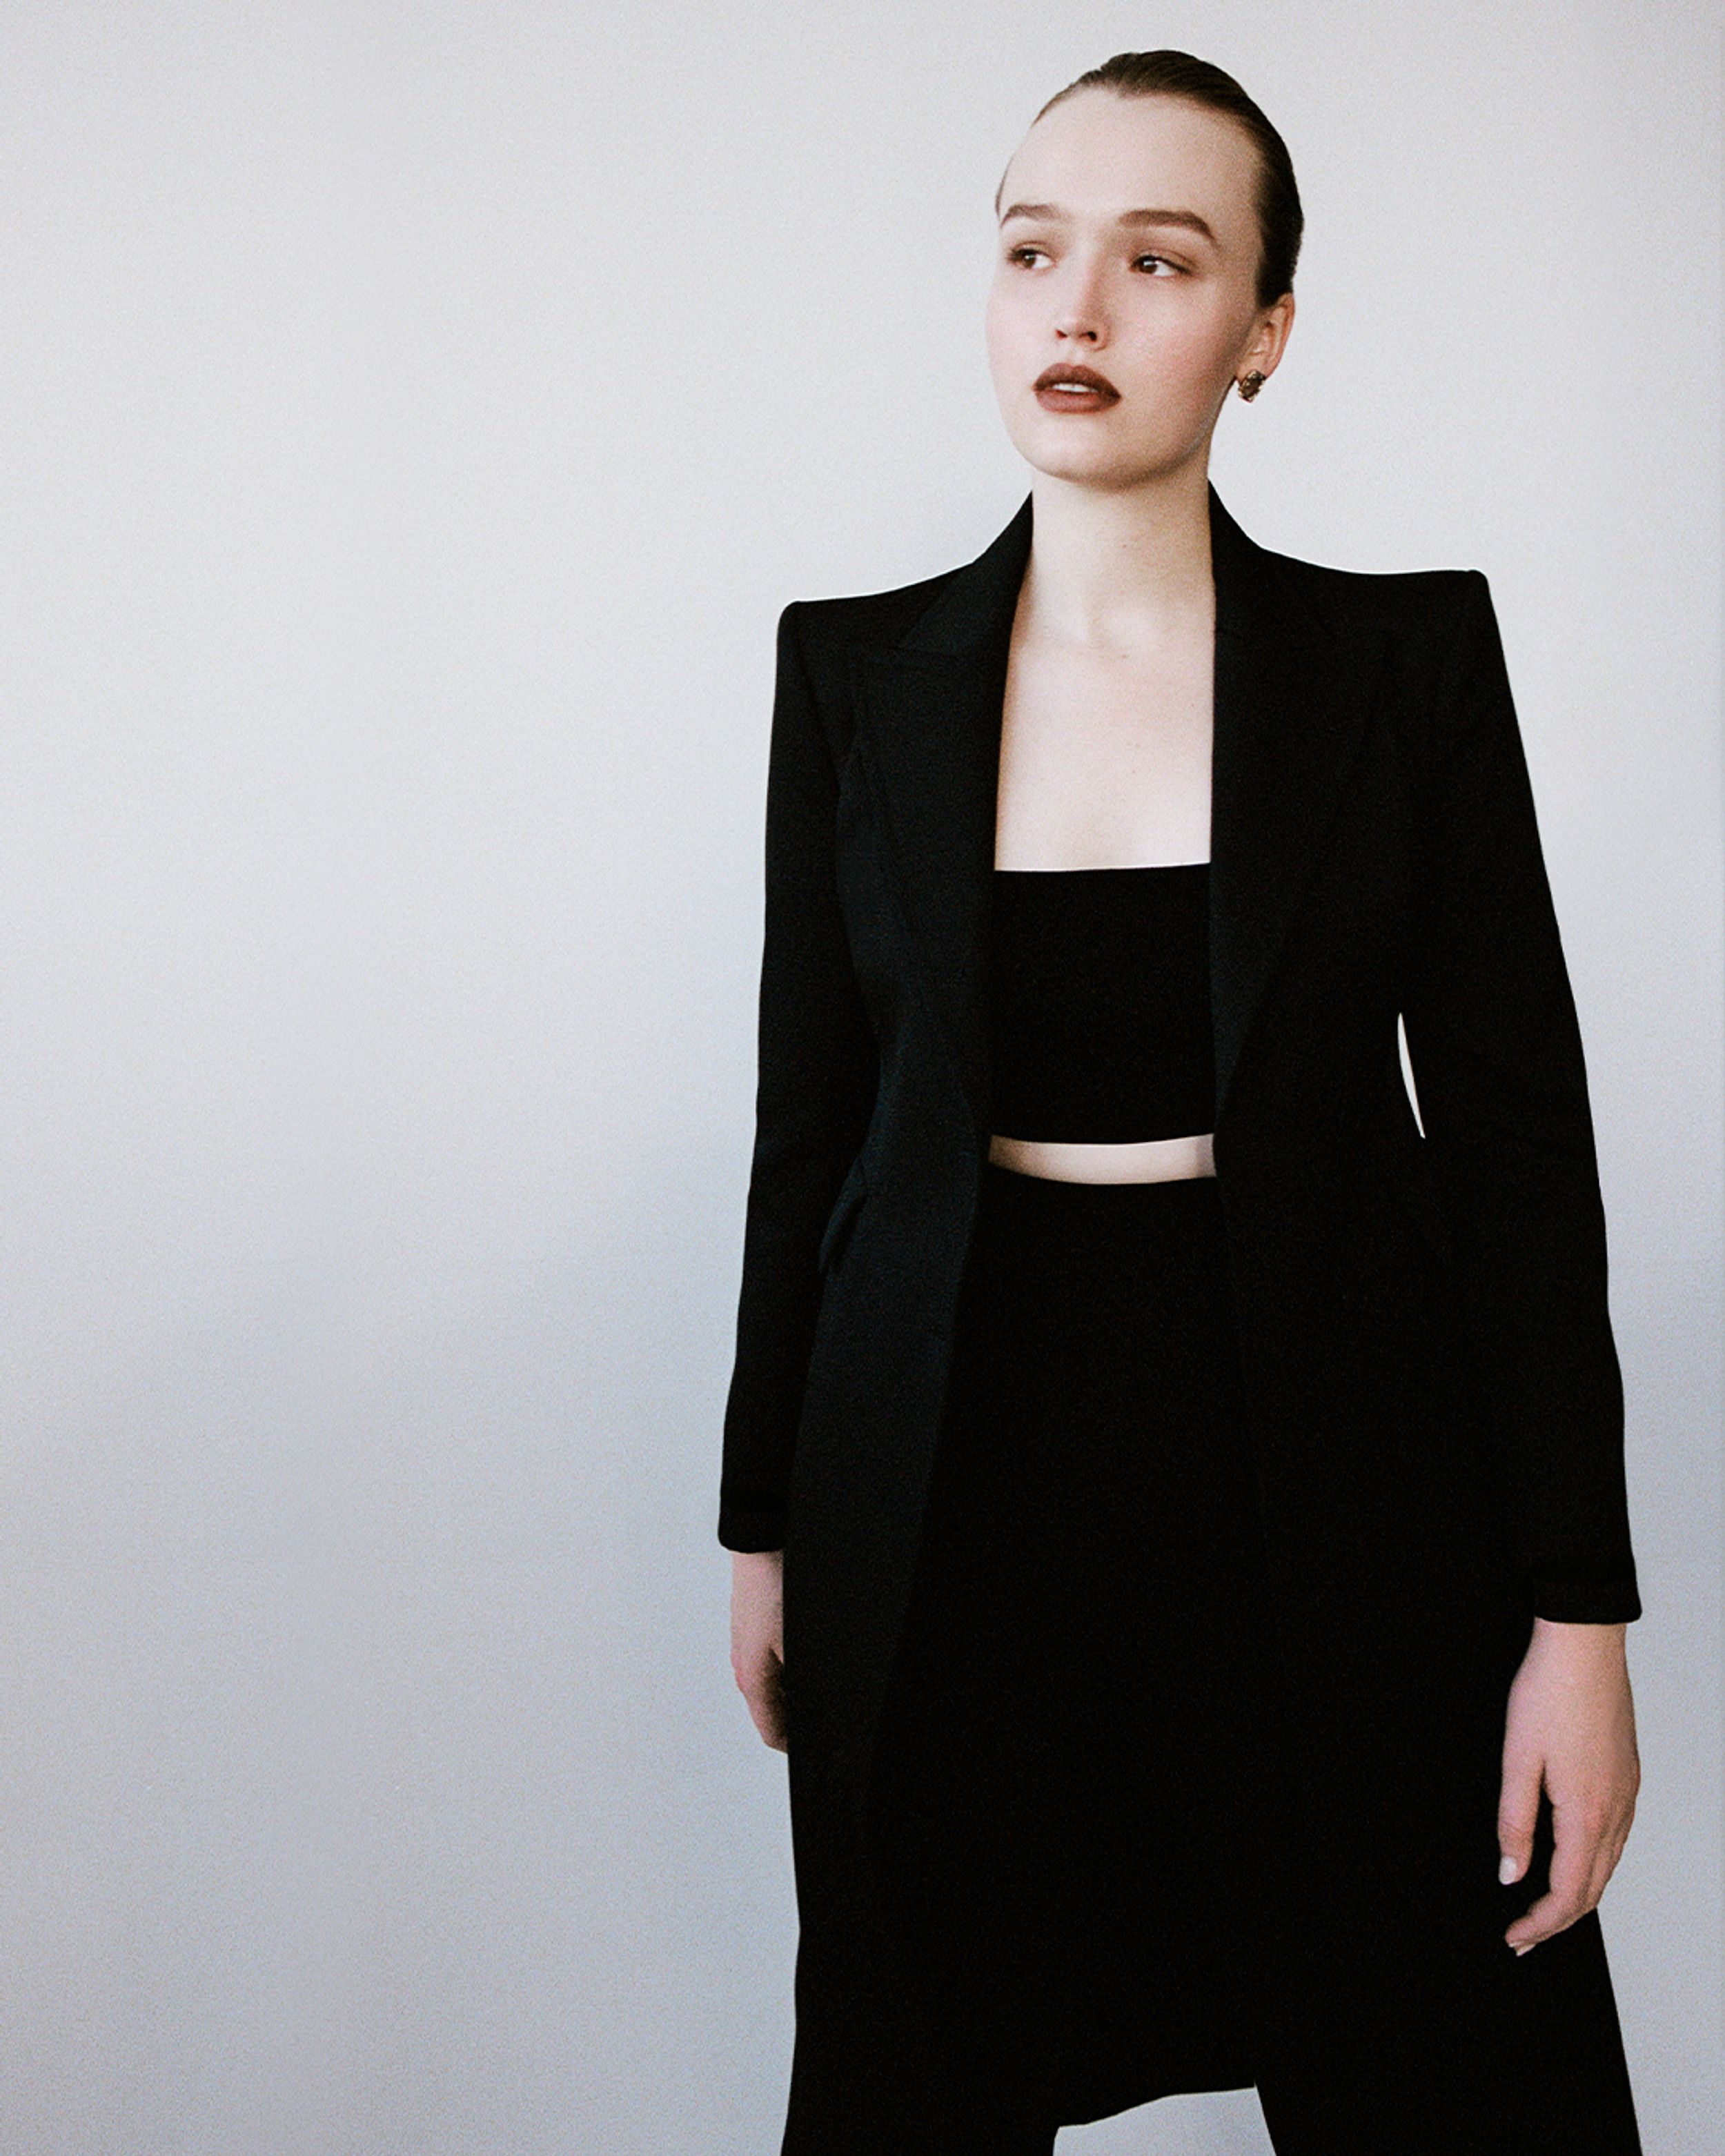 Maddison Brown standing in black jacket and black trousers with hair in a bun